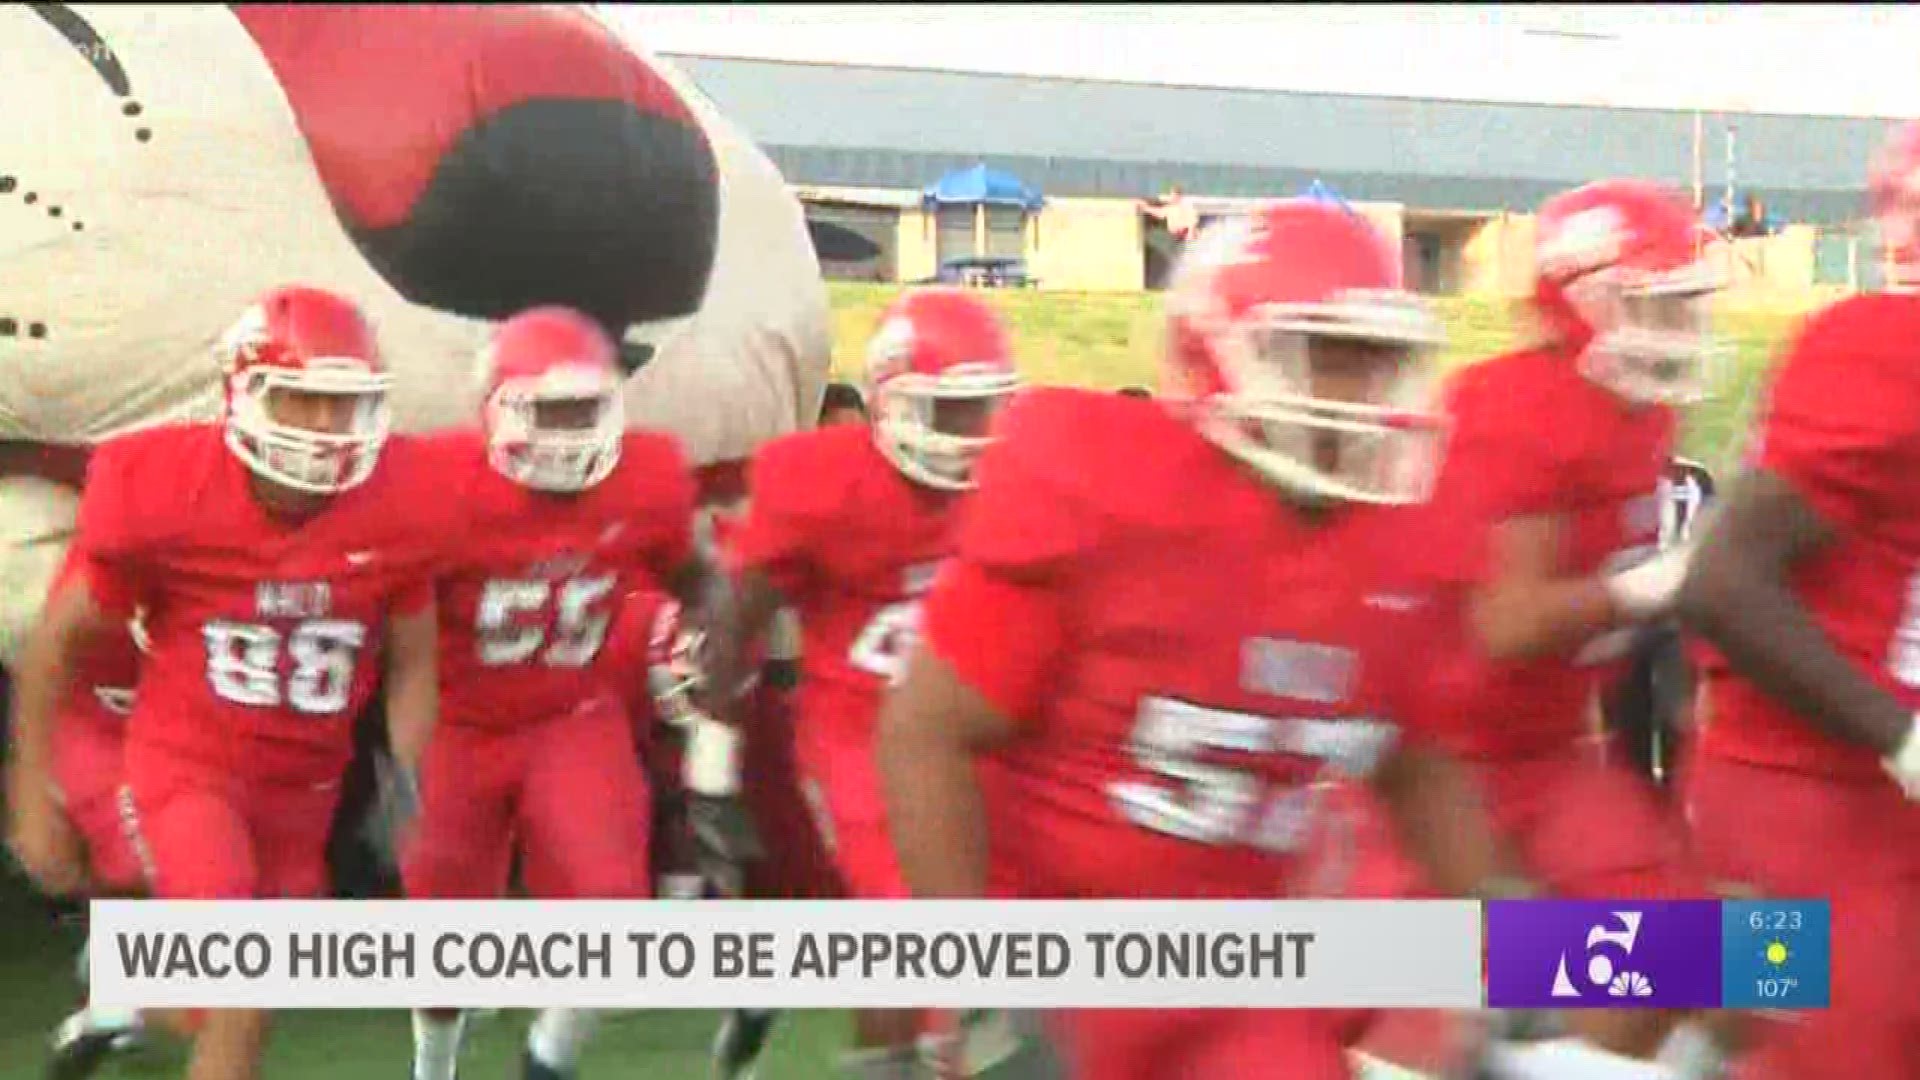 The new head football coach will be approved in closed session tonight.